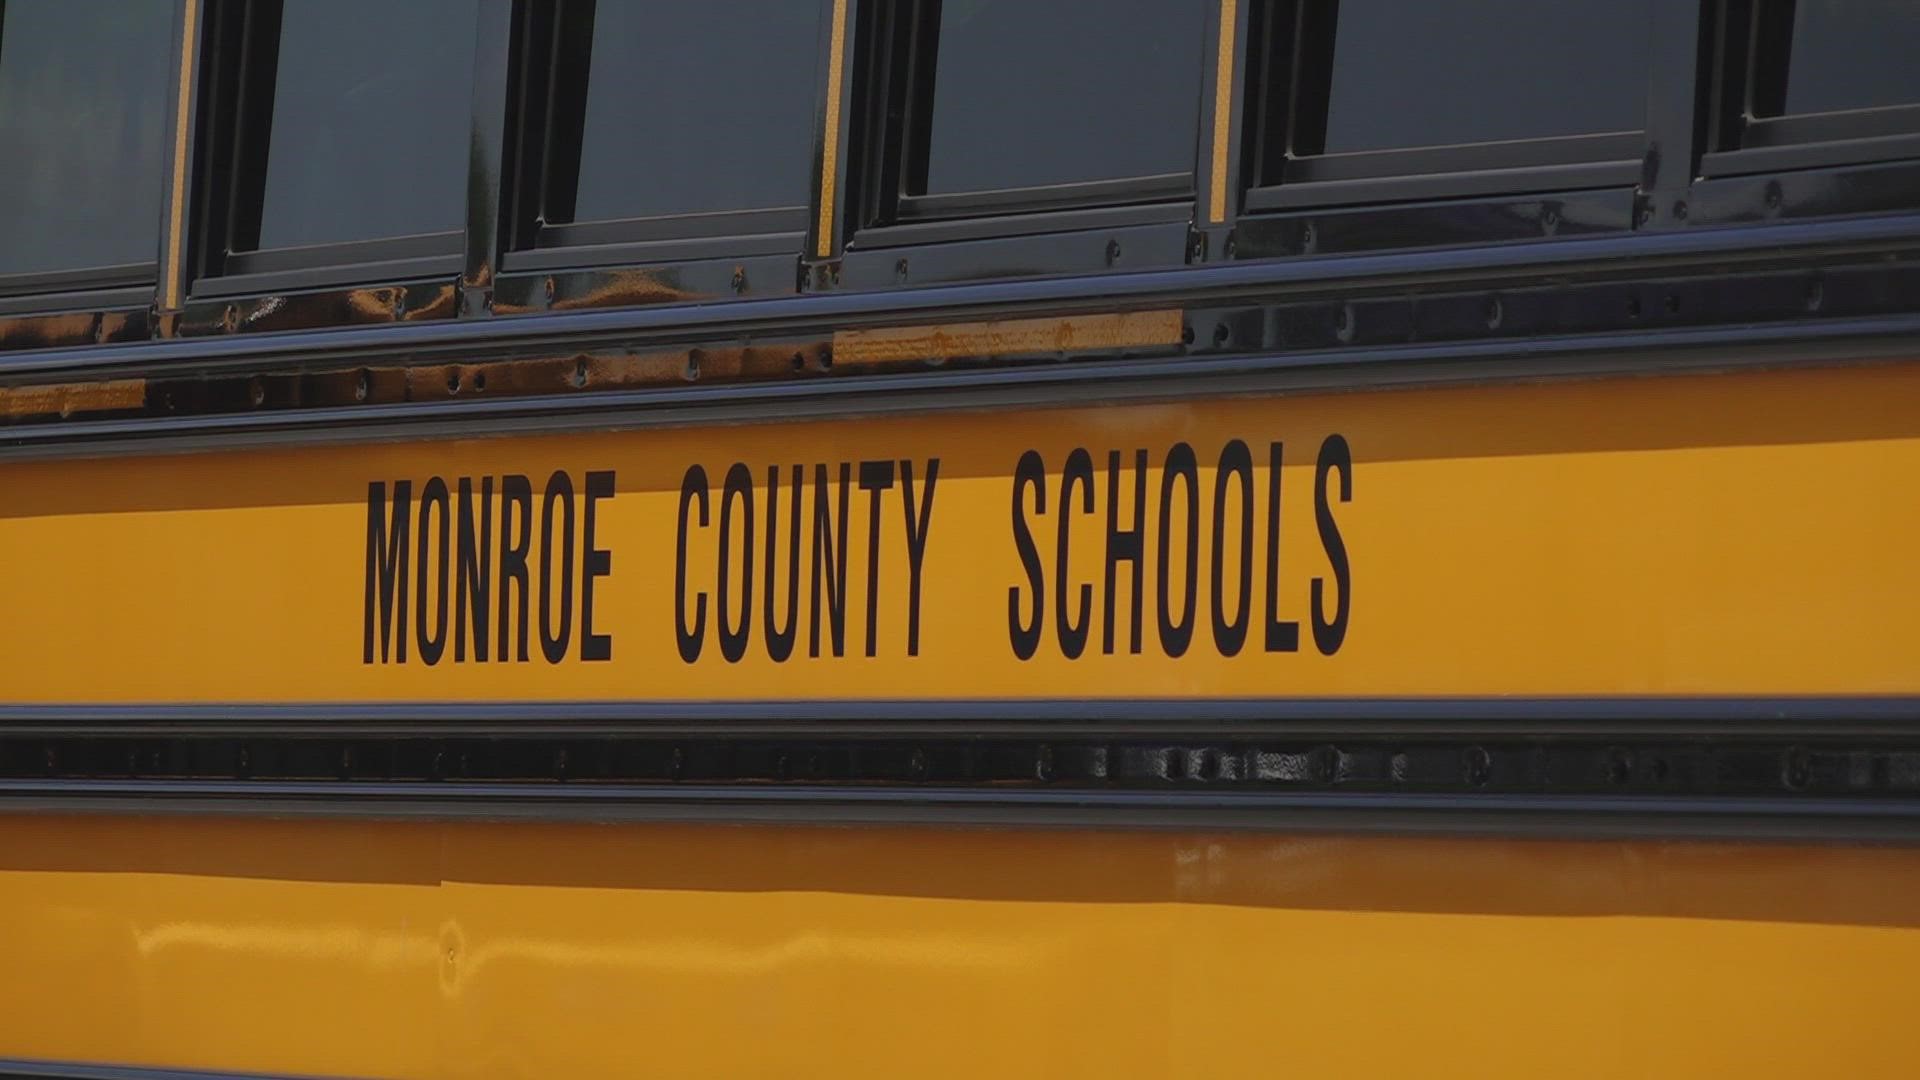 On Monday, Monroe County Schools said it would accept applications for all bus routes. Contractors told 10News the district isn't offering enough to stay afloat.